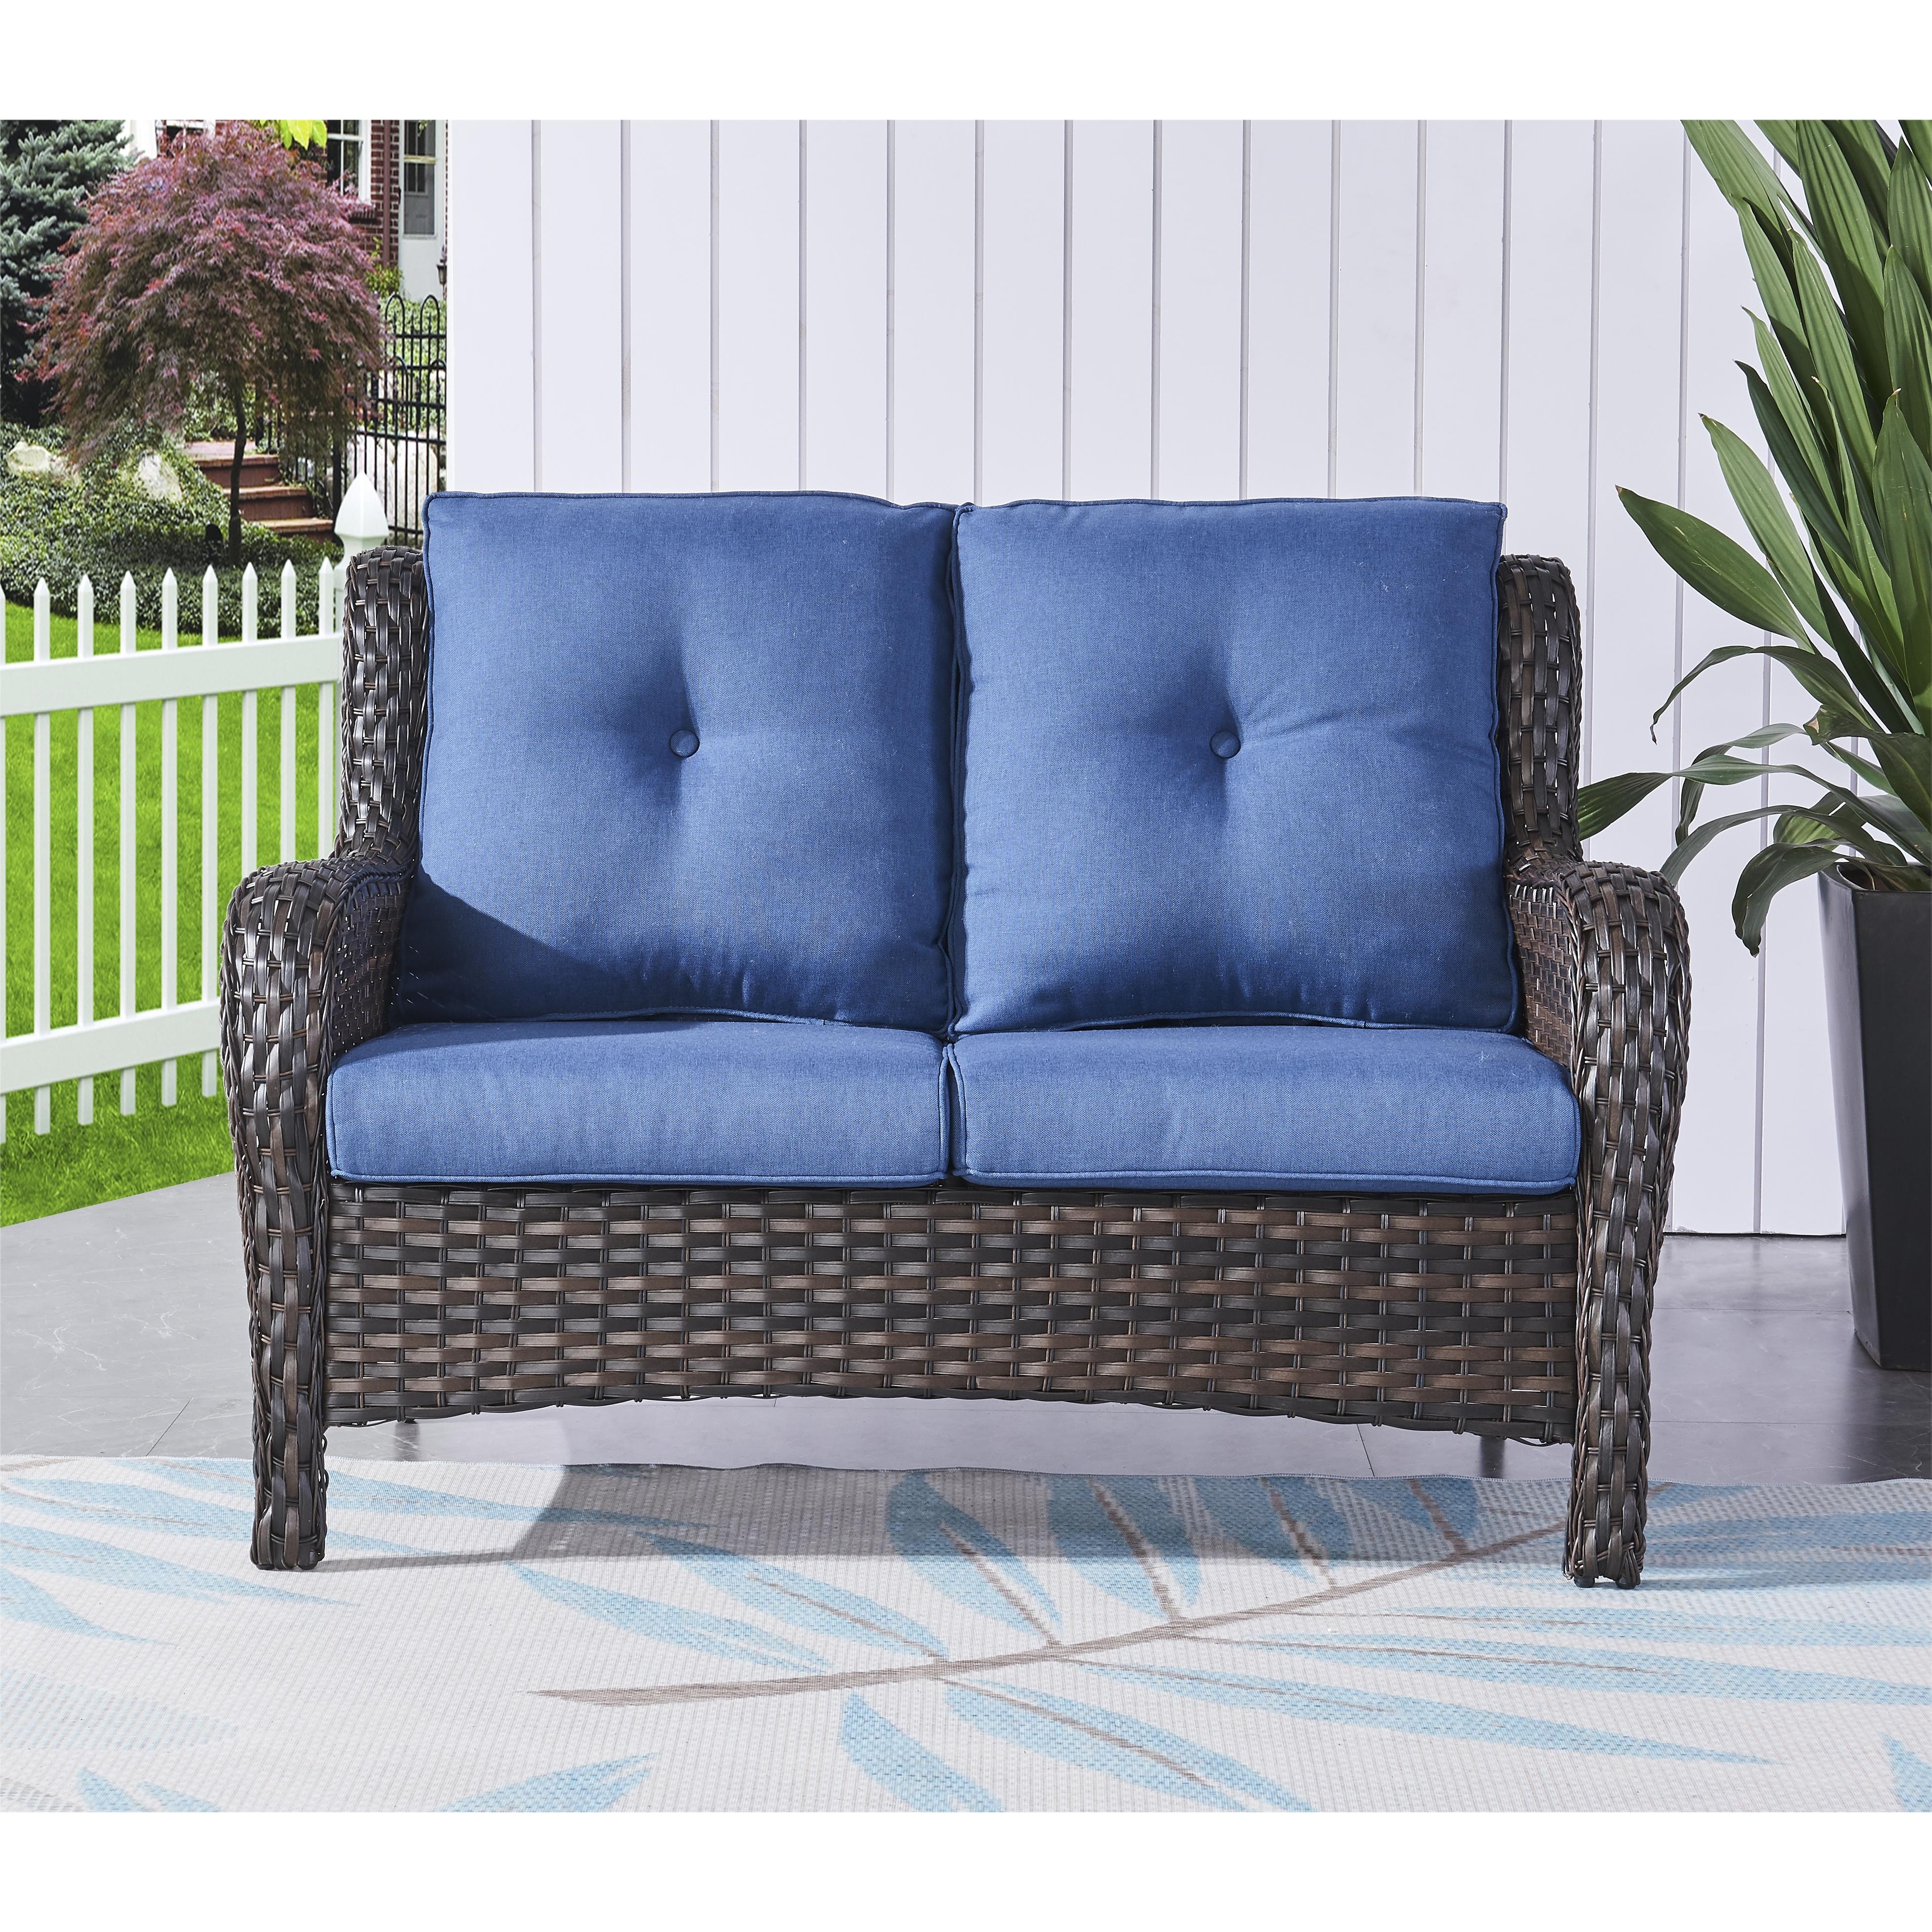 Pocassy Outdoor Patio Loveseat Sofa, Wide and Deep Seating Brown/Beige - image 2 of 5